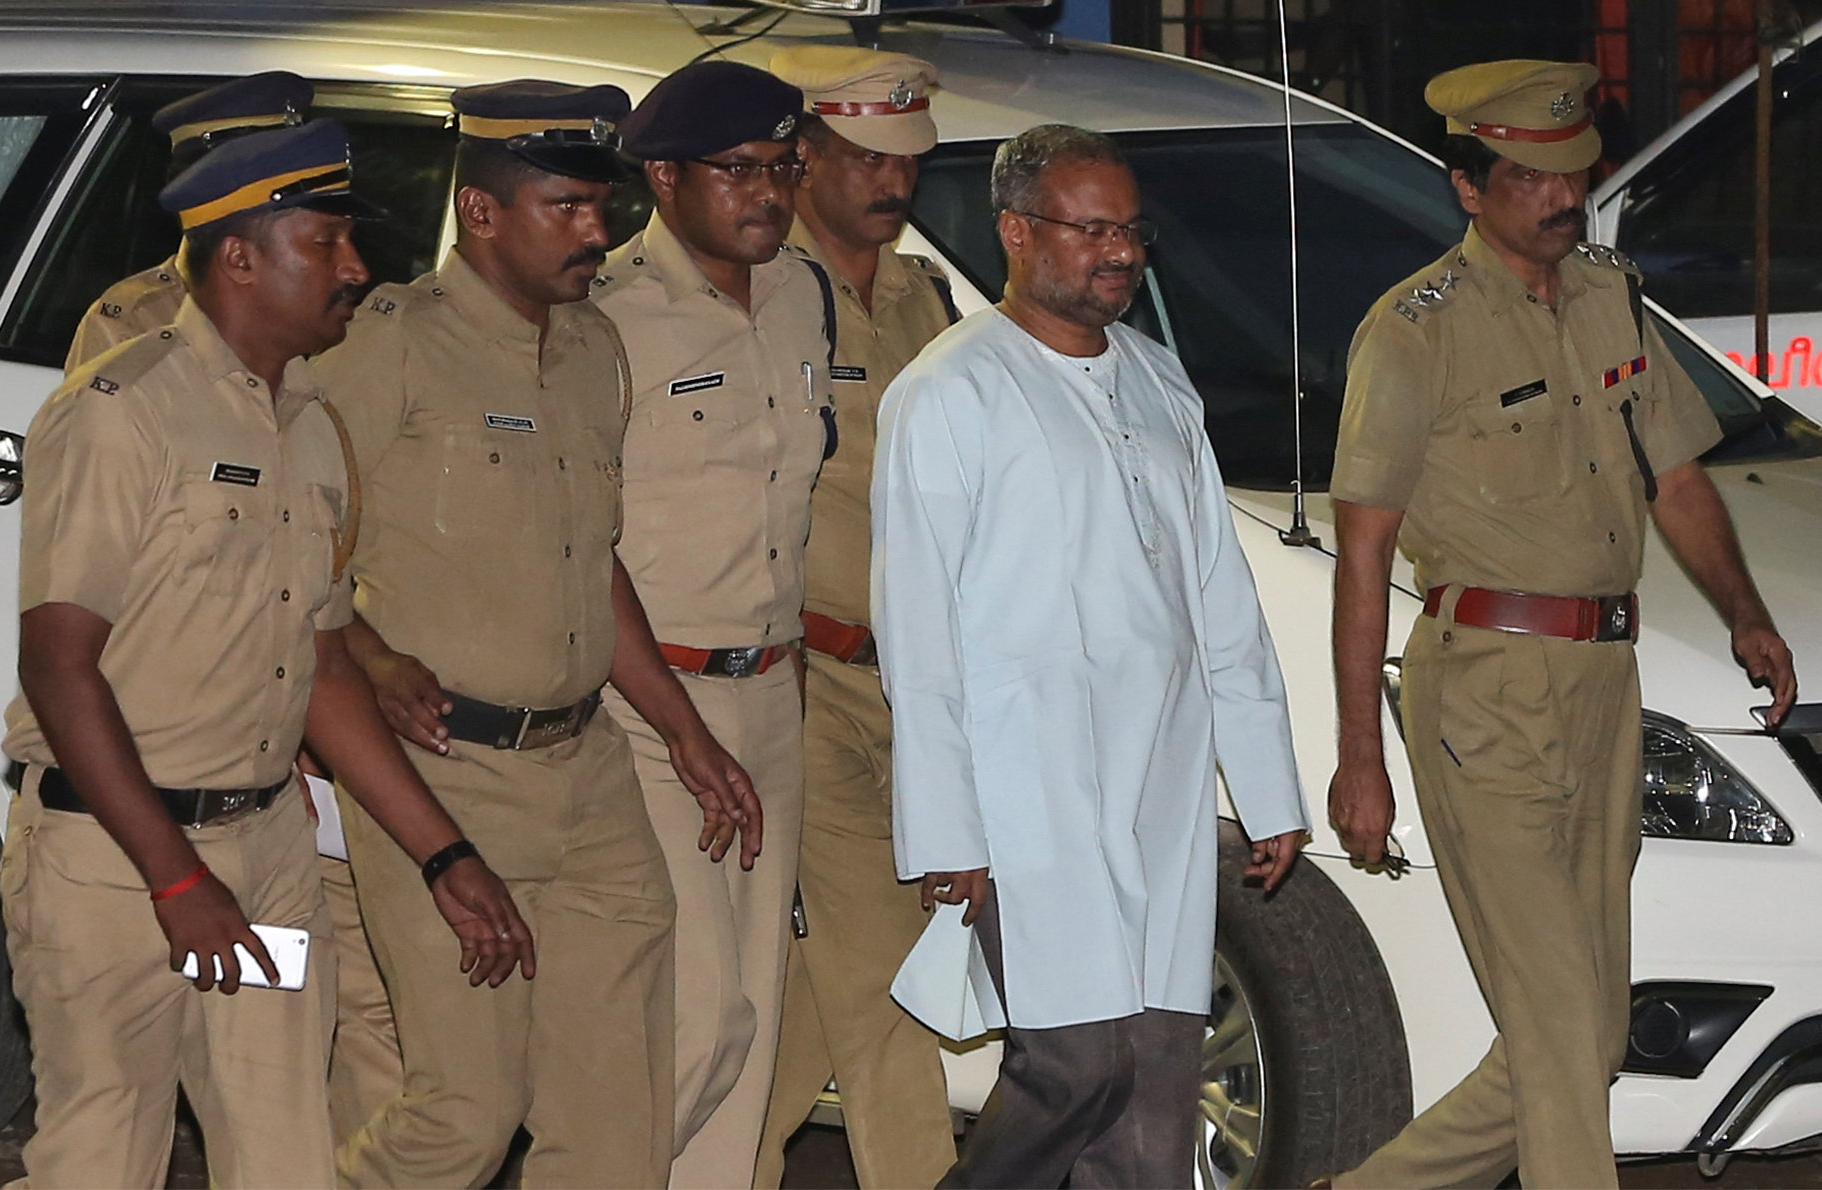 Indian court grants bail, with limits, to bishop accused of raping nun